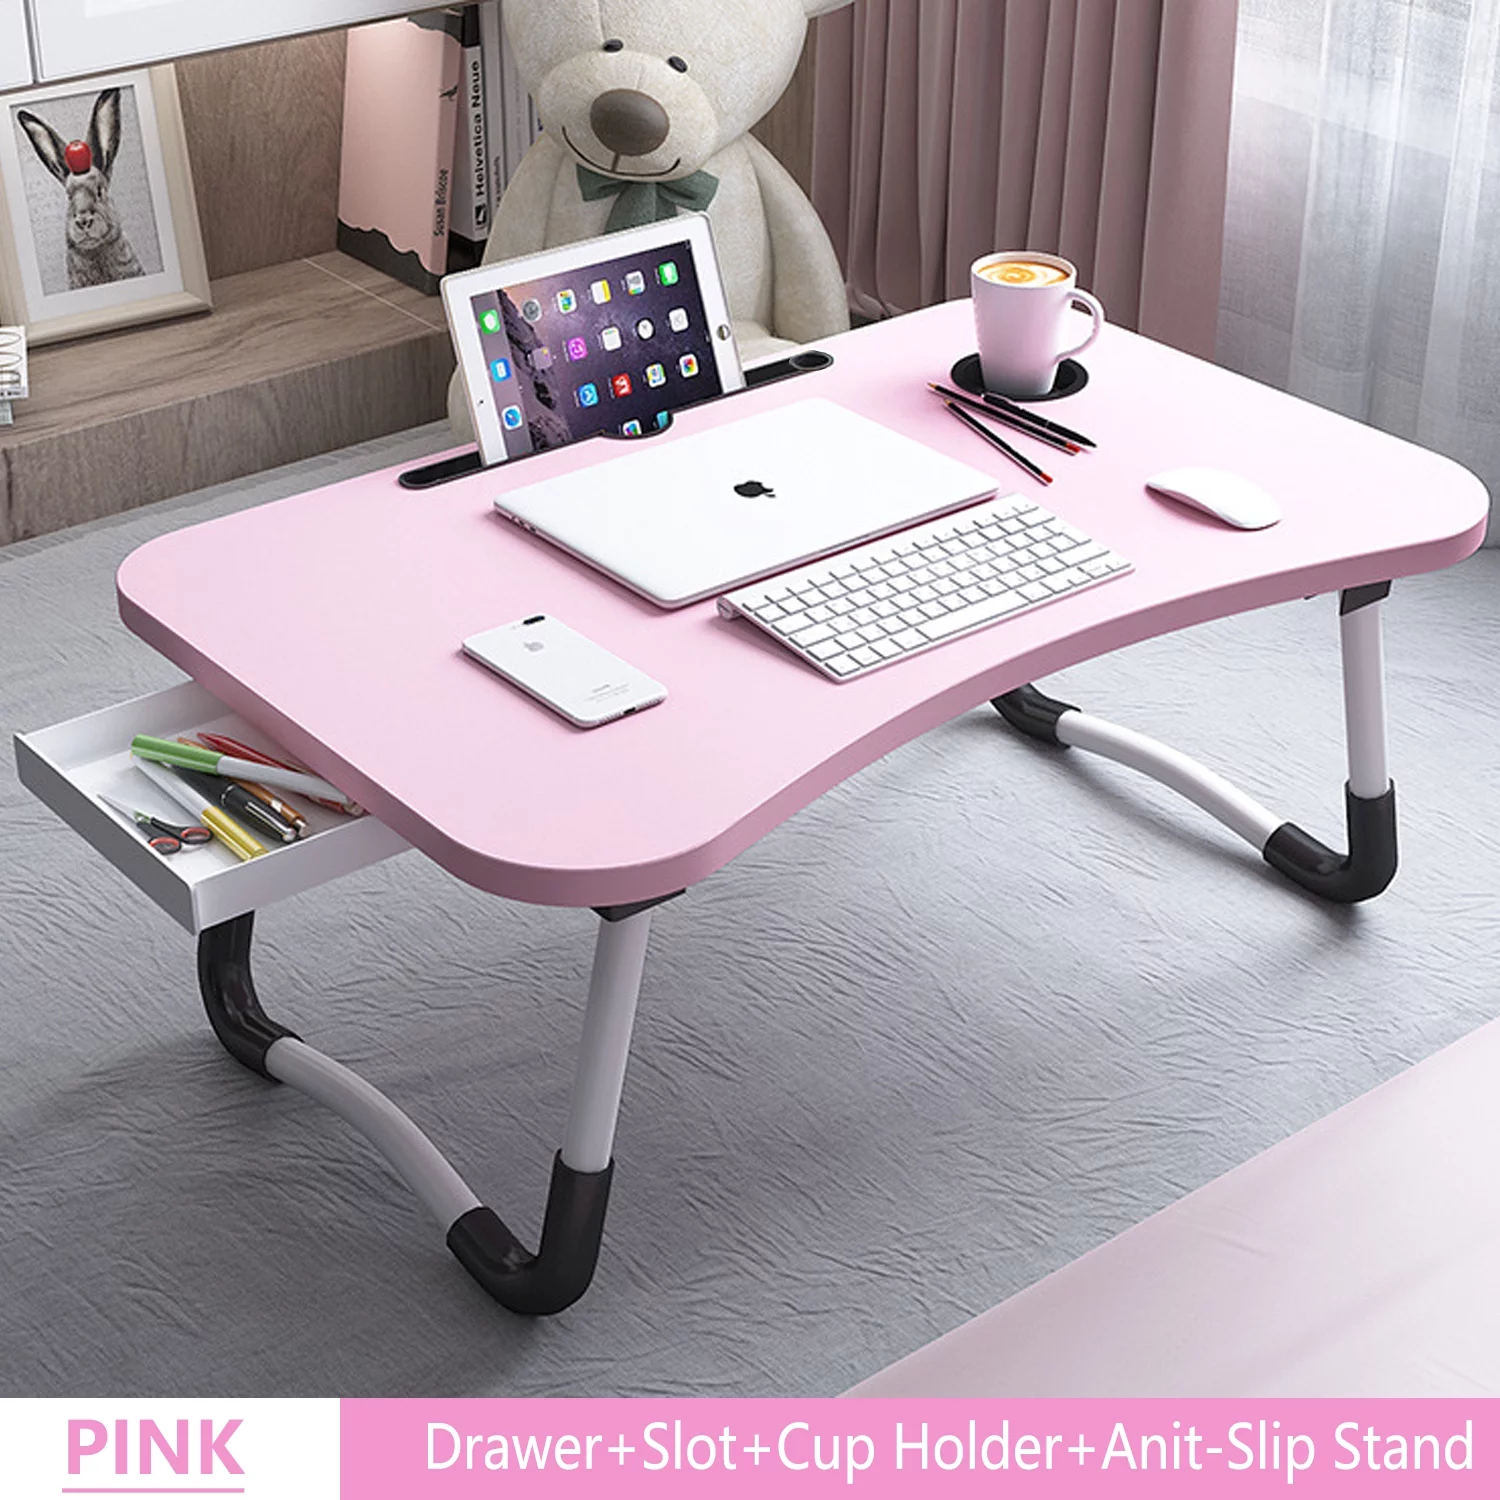 PHANCIR Foldable Lap Desk, 23.6 Inch Portable Wood Laptop Desk Table Workspace Organizer Bed Tray with iPad Slots, Cup Holder and Drawer, Anit-Slip for Working Reading Writing, Eating, Watching-Pink